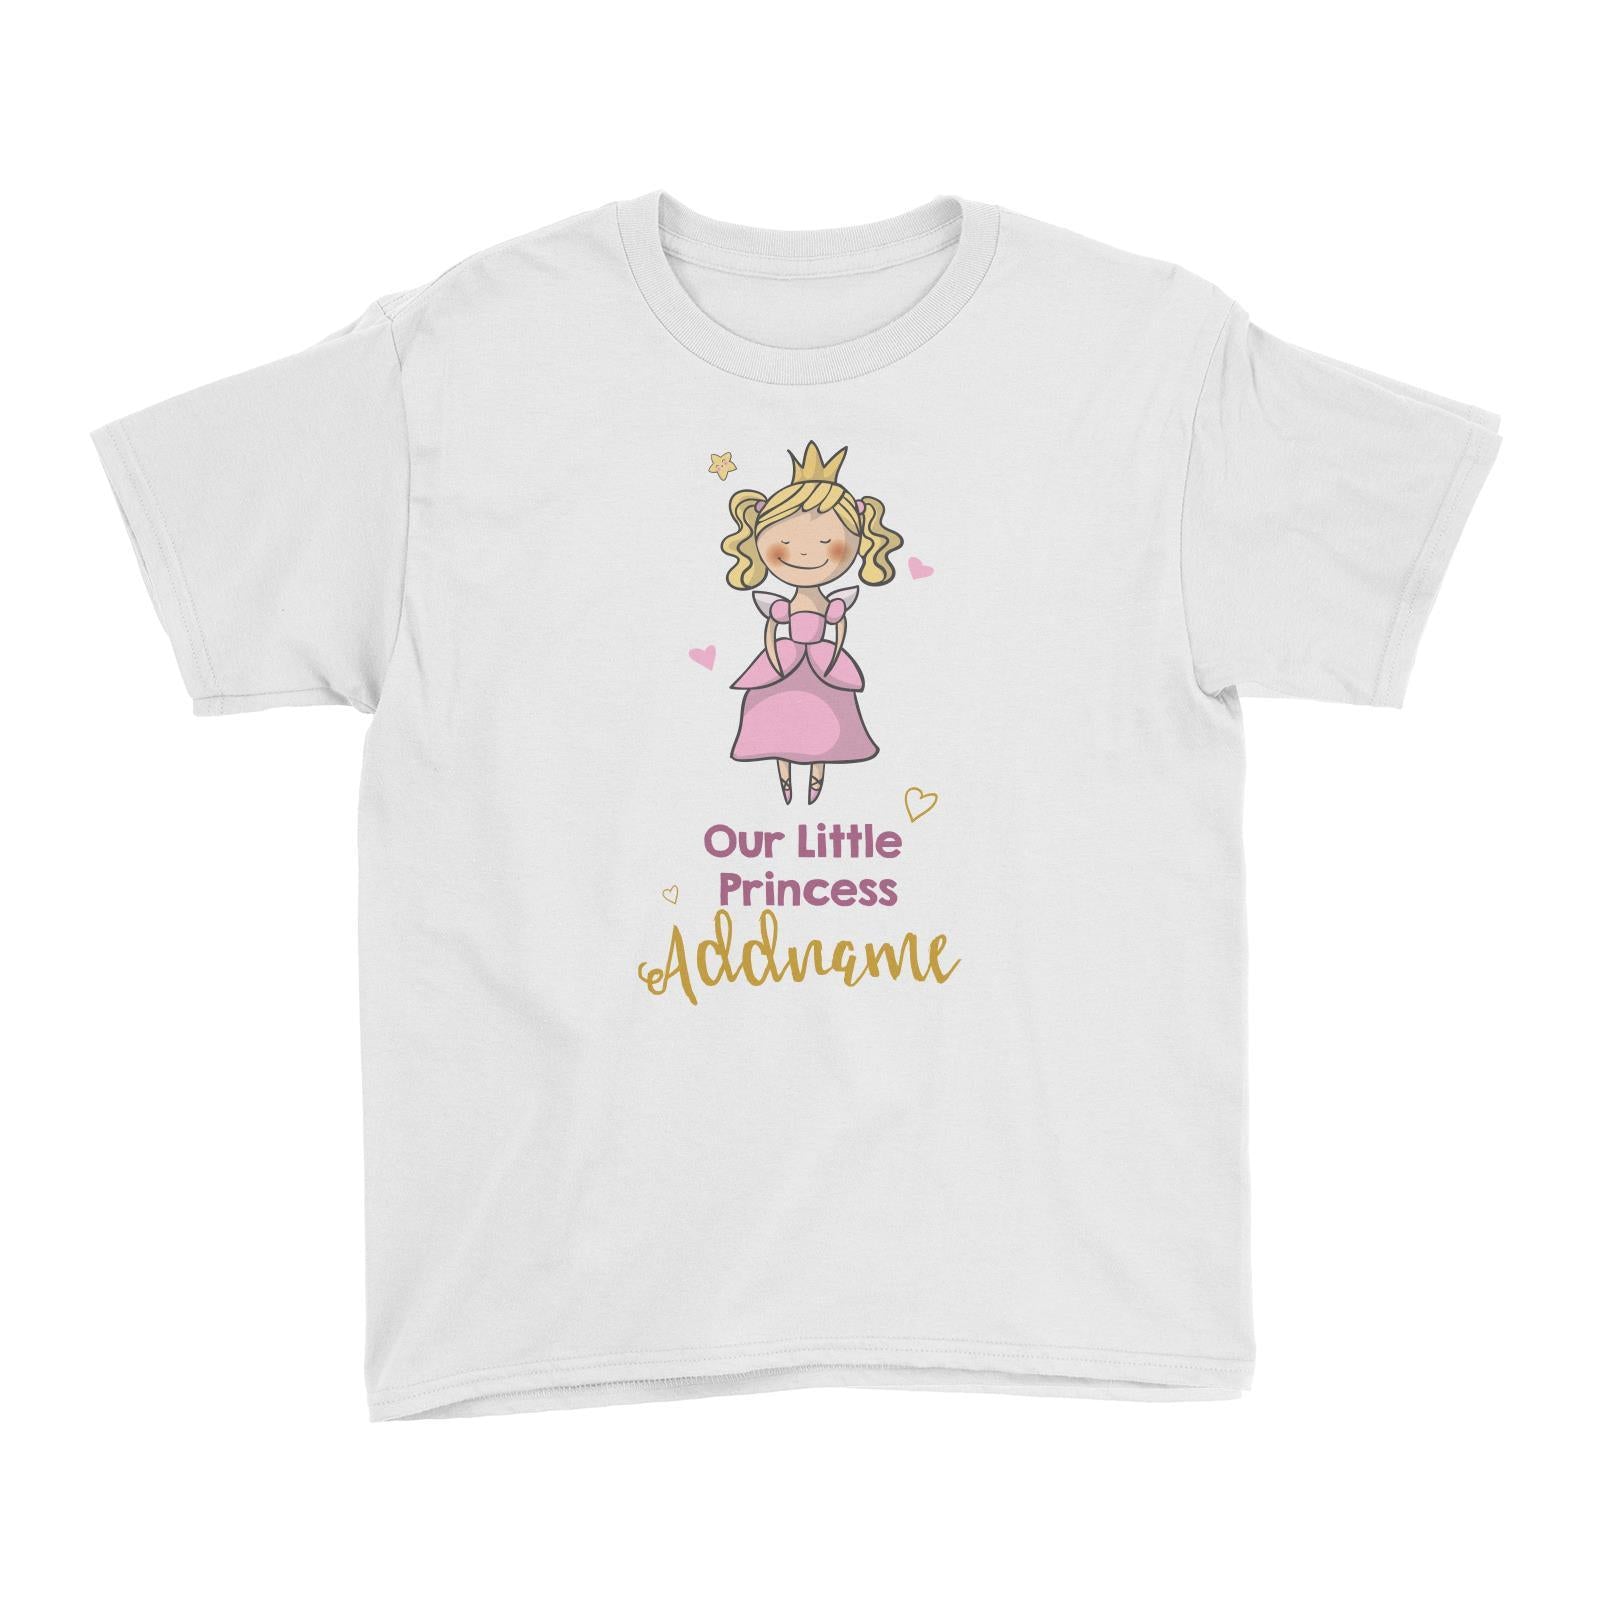 Our Little Princess in Pink Dress with Addname Kid's T-Shirt